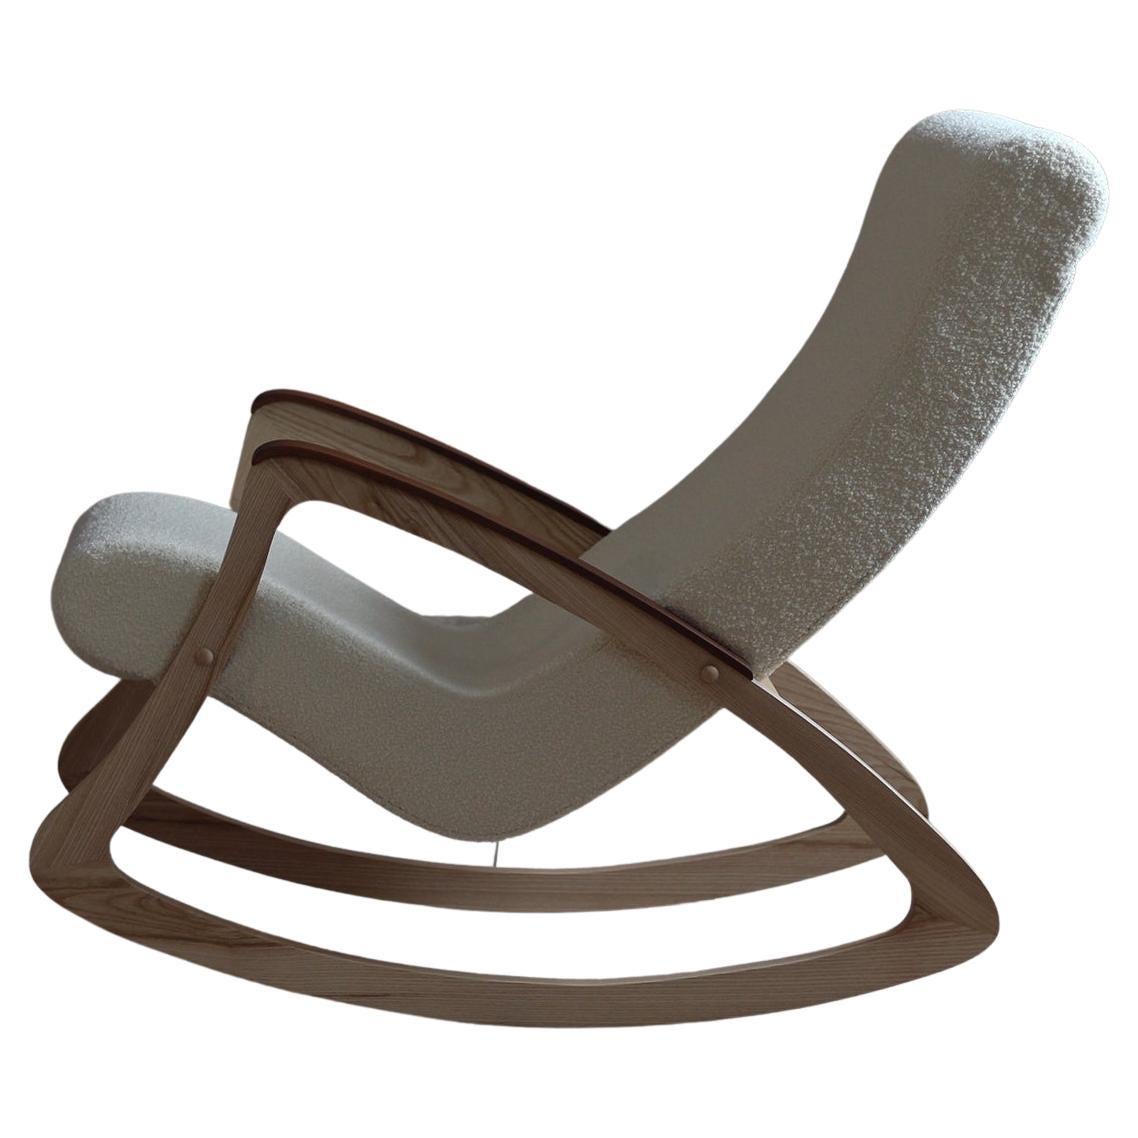 Rare Vintage Rocking Chair, Czechoslovakia, 1950s, Reupholstered in French Boucle For Sale